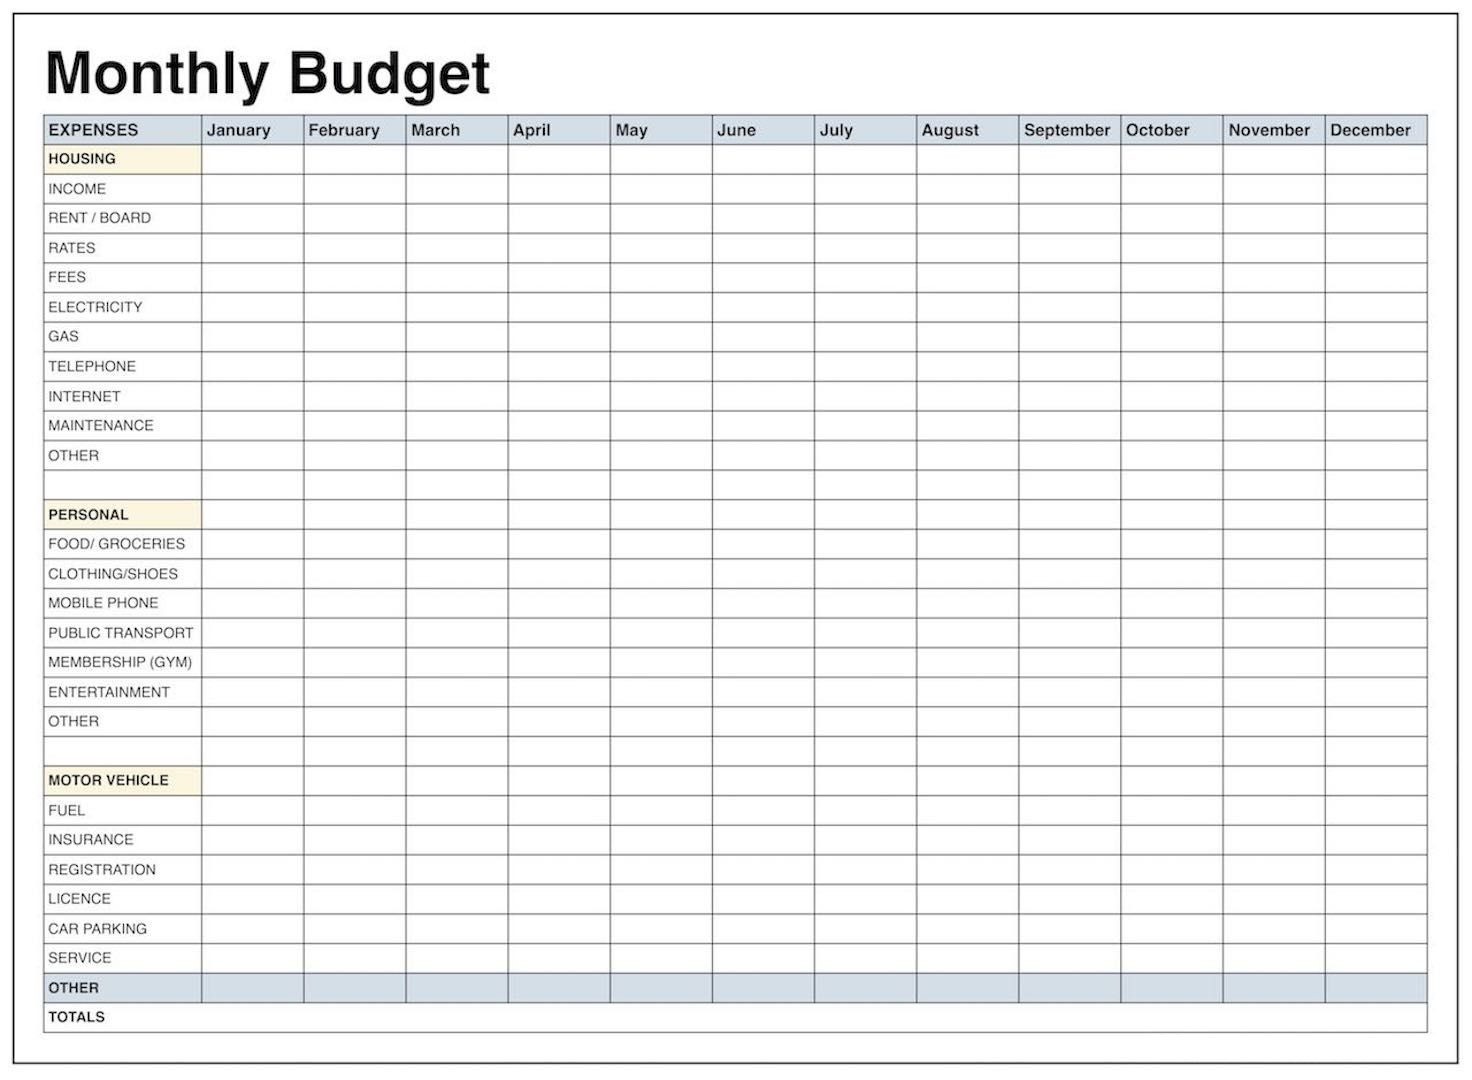 monthly-budget-spreadsheet-family-planner-db-excel